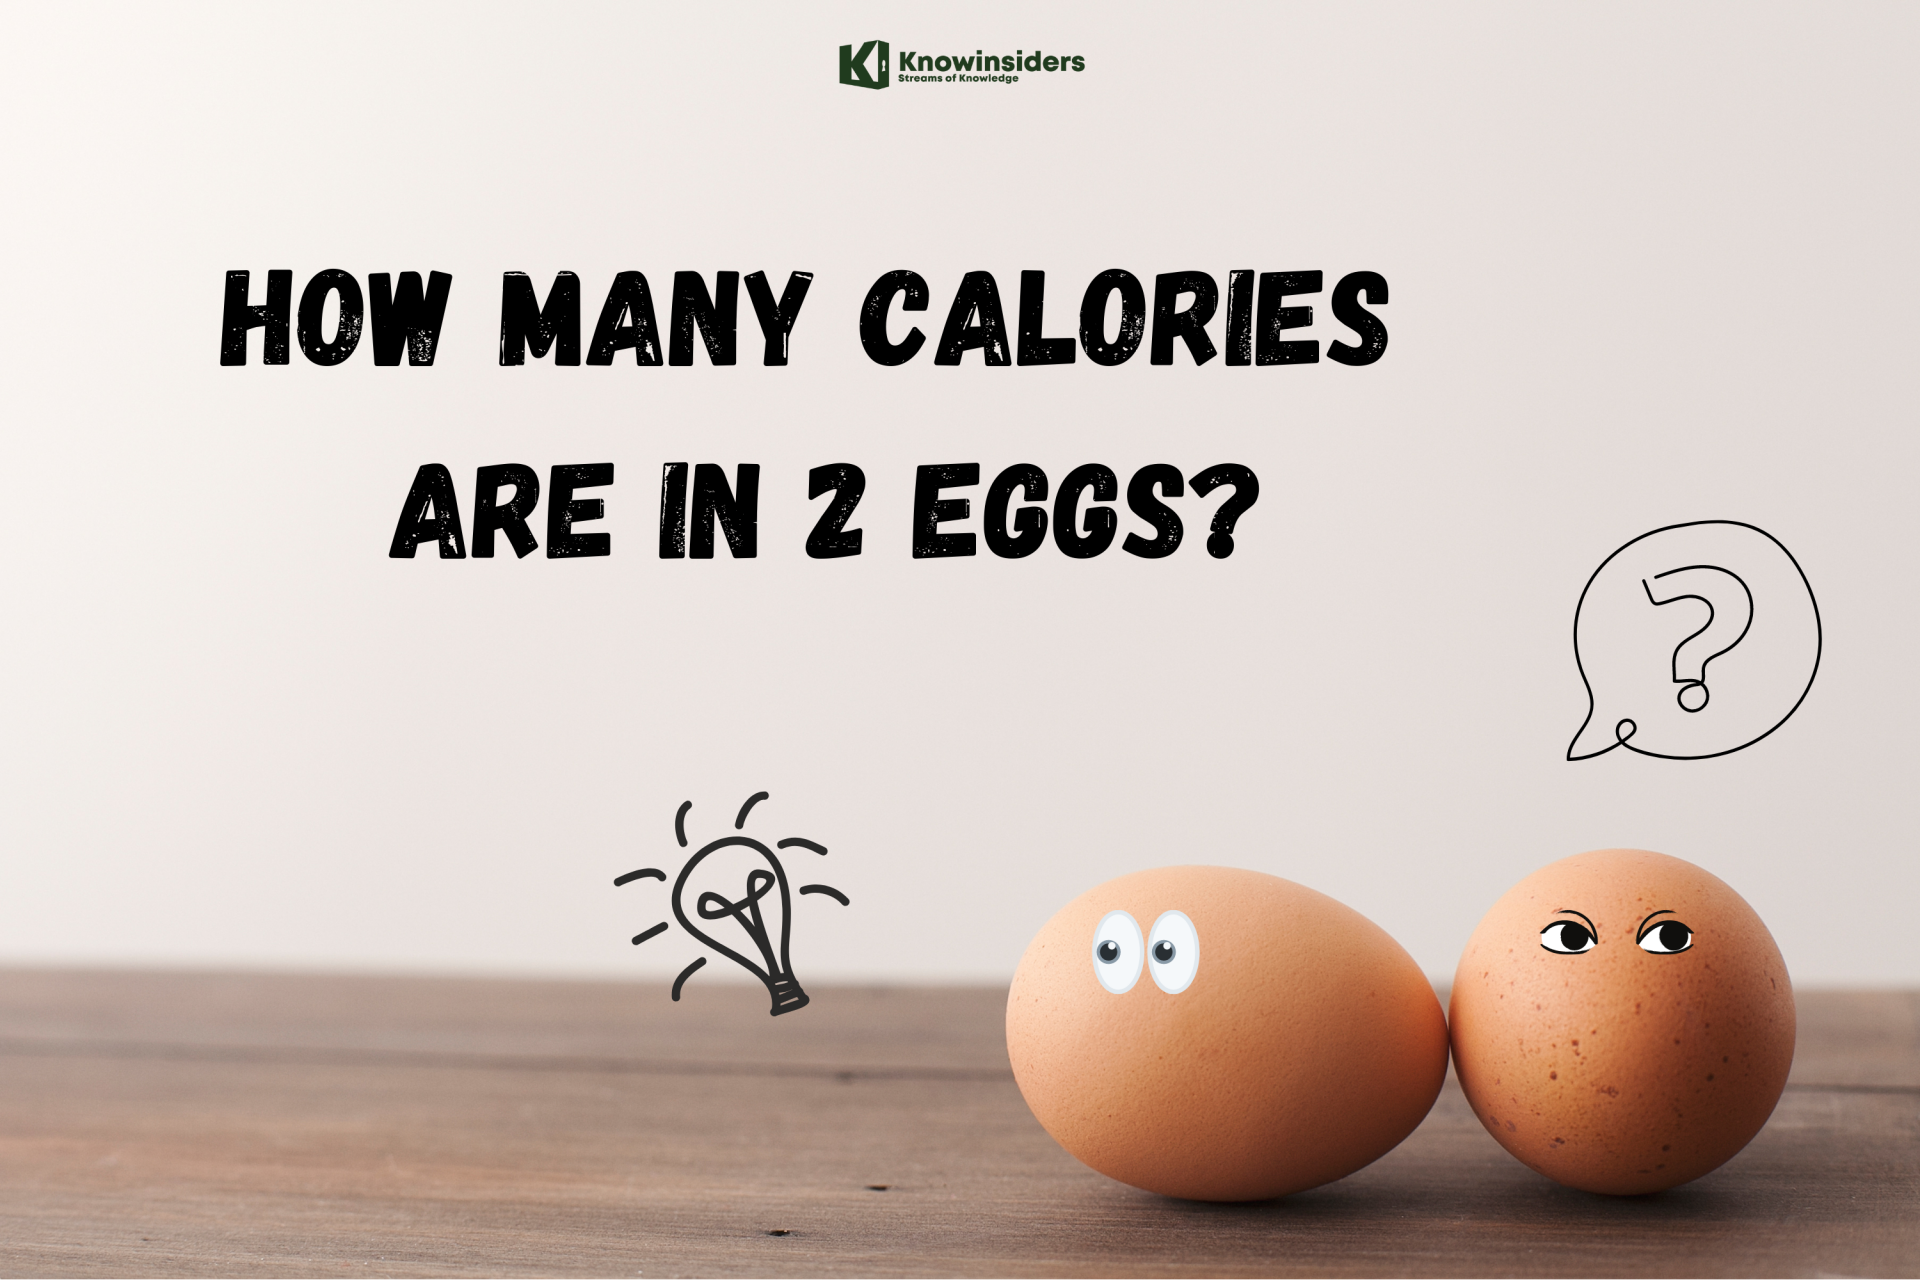 How Many Calories Are In 2 Eggs?